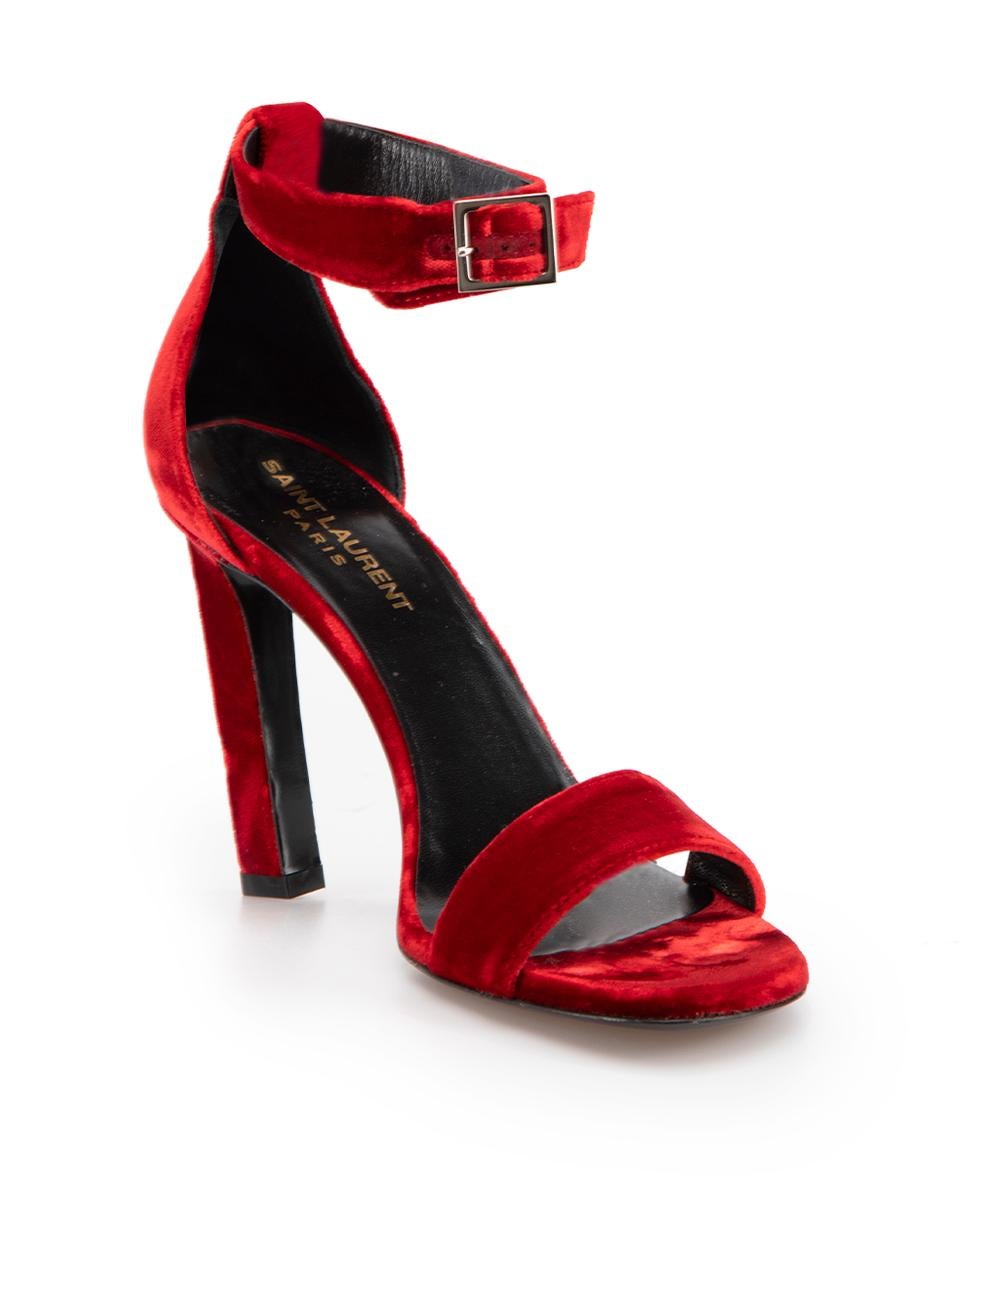 CONDITION is Very good. Minimal wear to shoes is evident. Minimal wear to both toe straps and heel stems with indents to the velvet on this used Saint Laurent designer resale item.



Details


Red

Velvet

Toe strap

Ankle buckle fastening

Mid